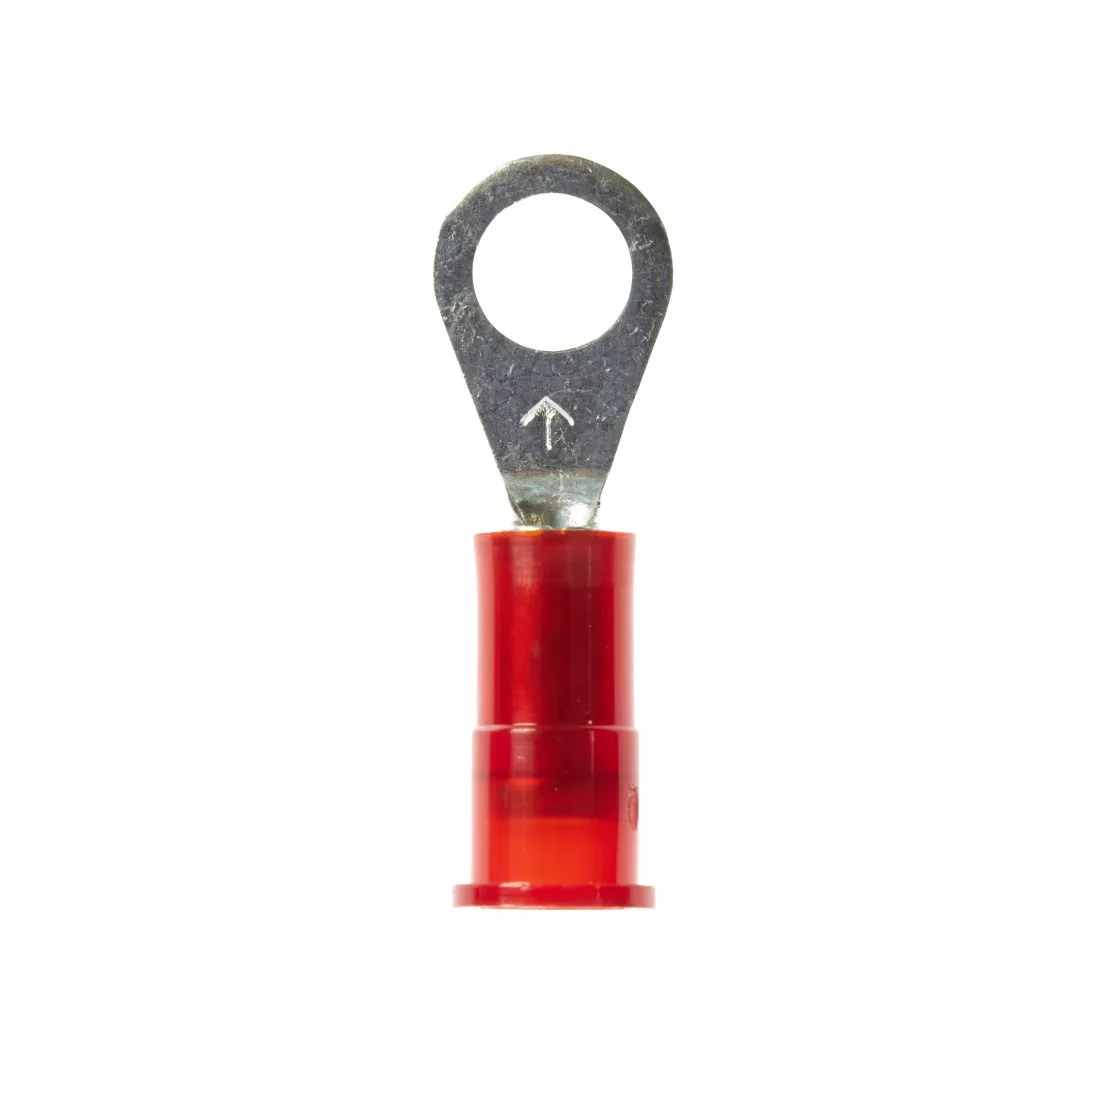 3M™ Scotchlok™ Ring Nylon Insulated, 100/bottle, MNG18-516R/SX,
standard-style ring tongue fits around the stud, 500/Case